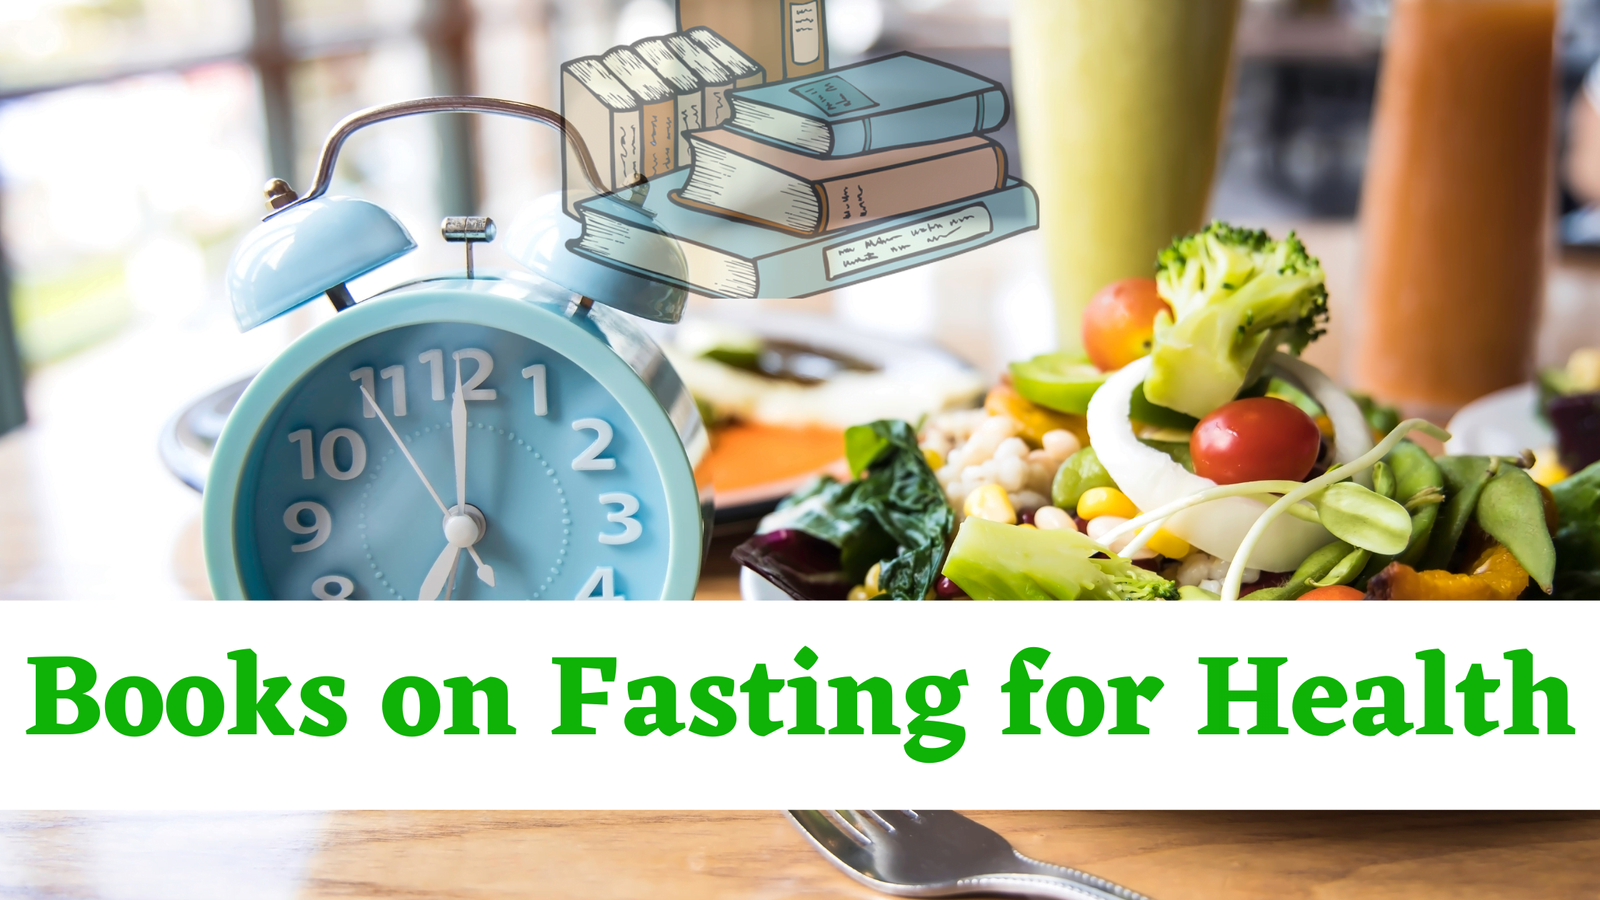 Books on Fasting for Health and Wellness Images